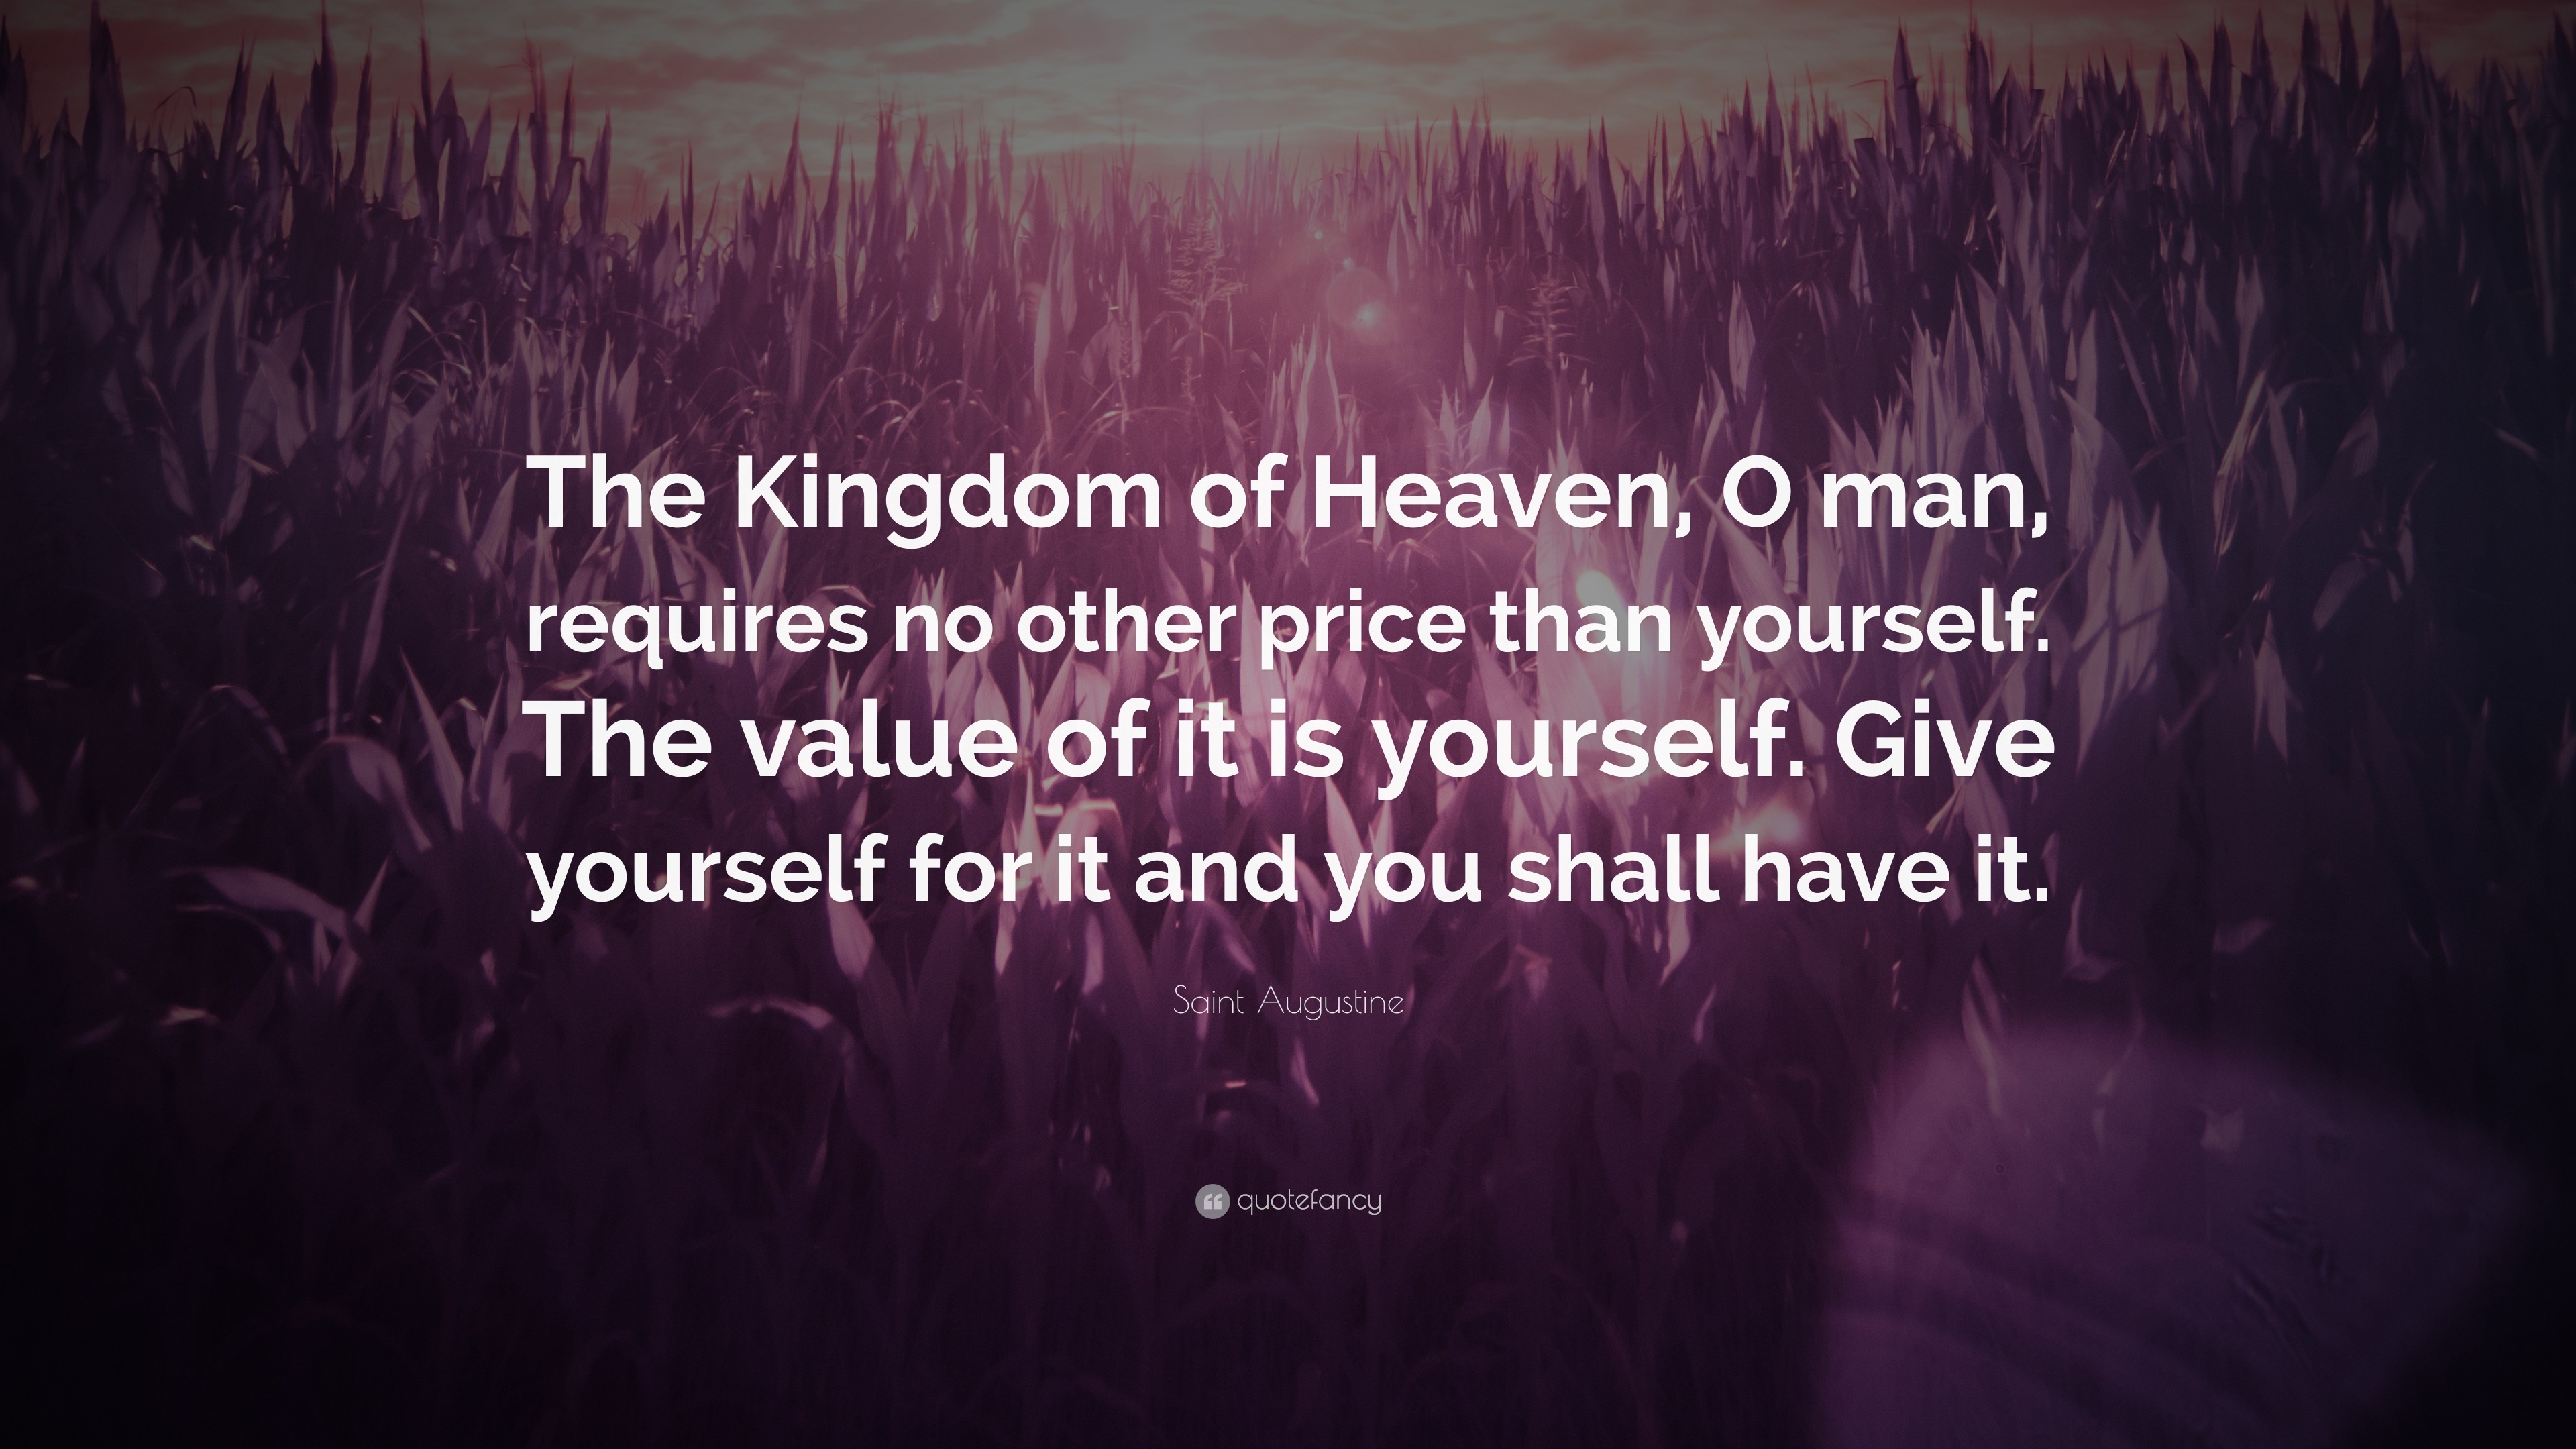 Saint Augustine Quote The Kingdom of Heaven, O man, requires no other